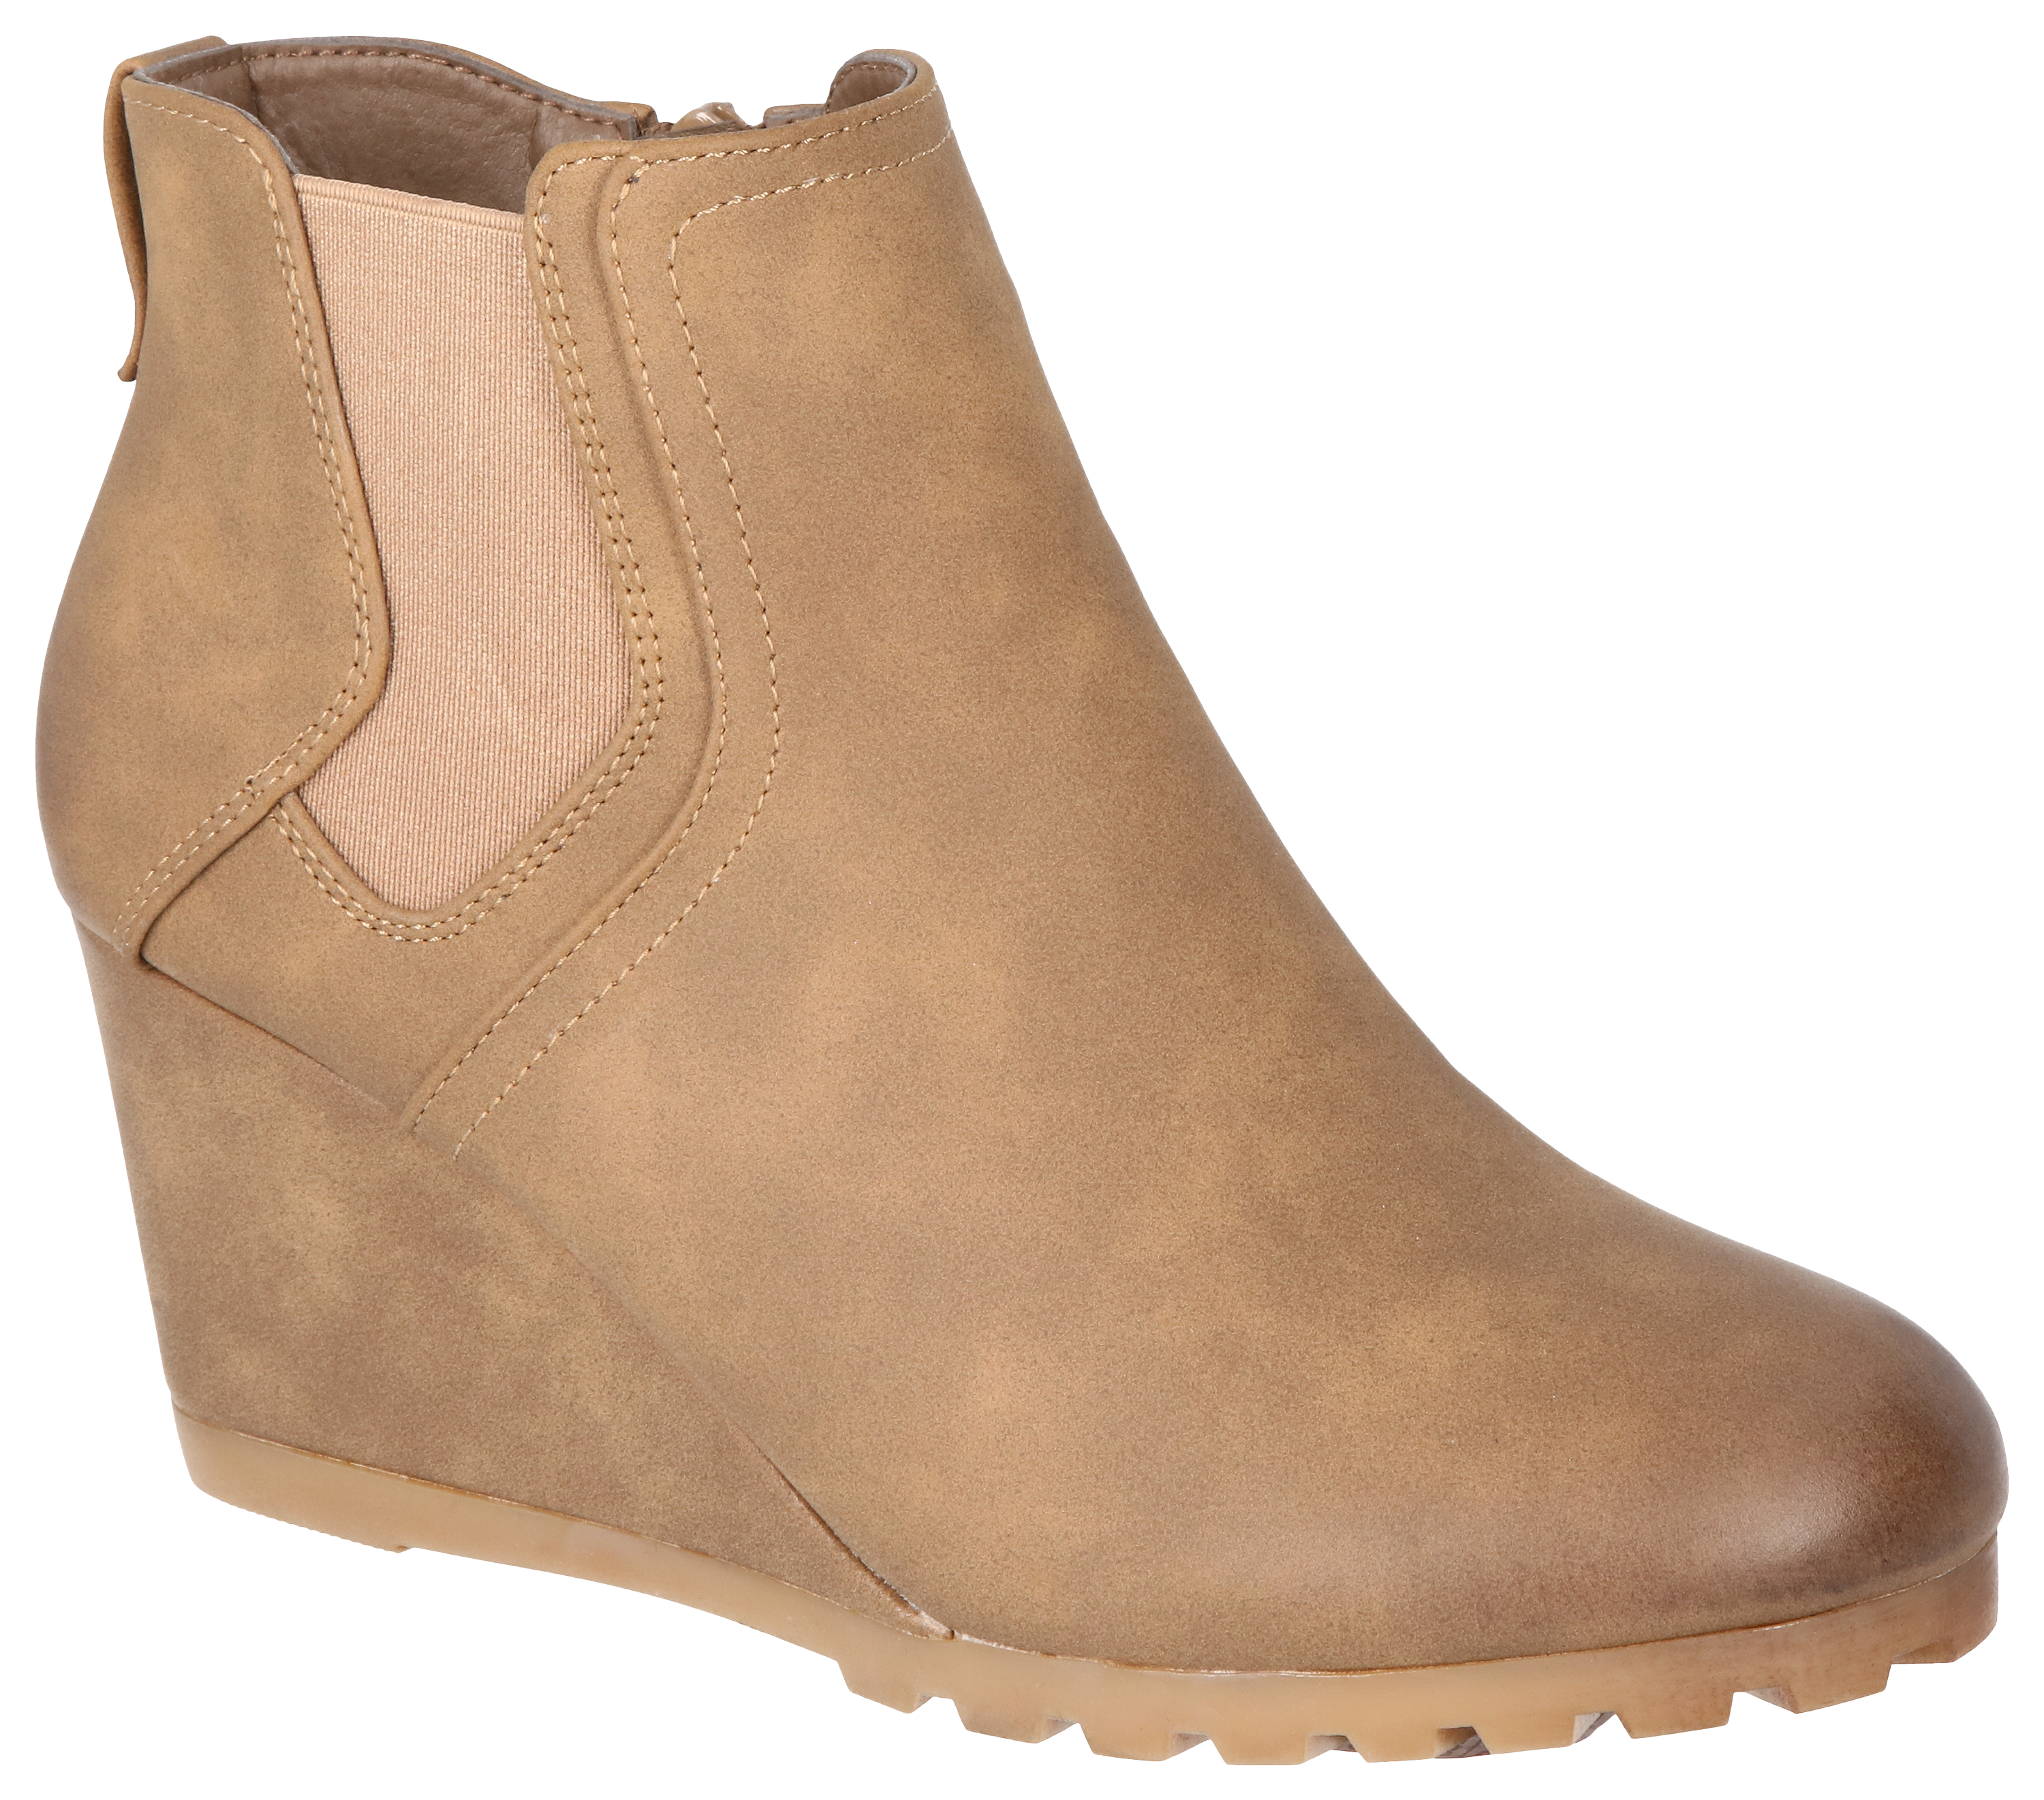 Natural Reflections Trista Rugged Boots for Ladies - Taupe - 9M